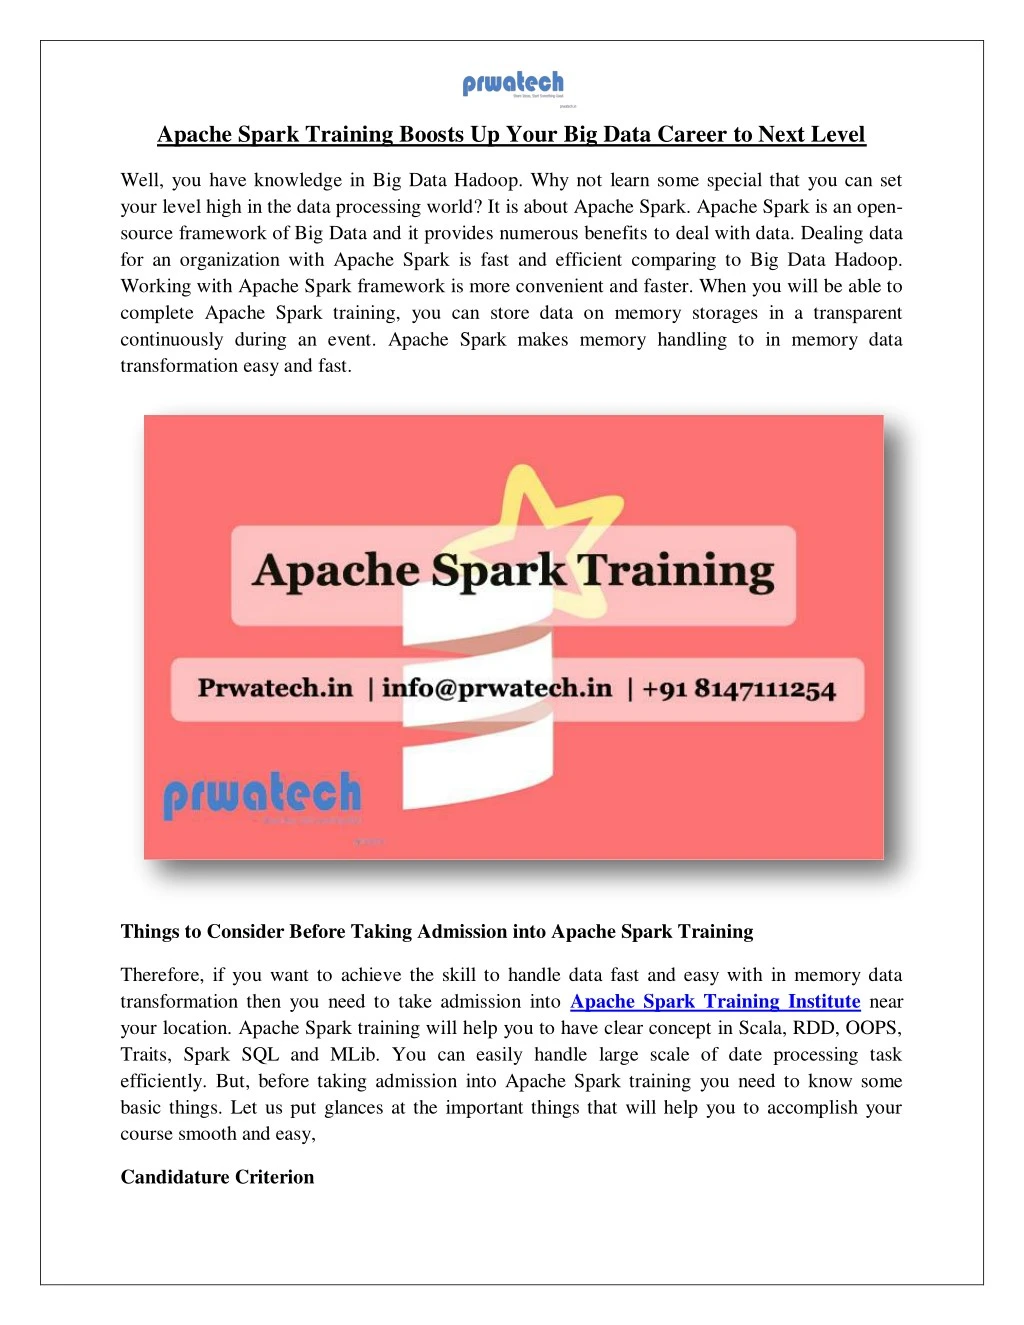 apache spark training boosts up your big data